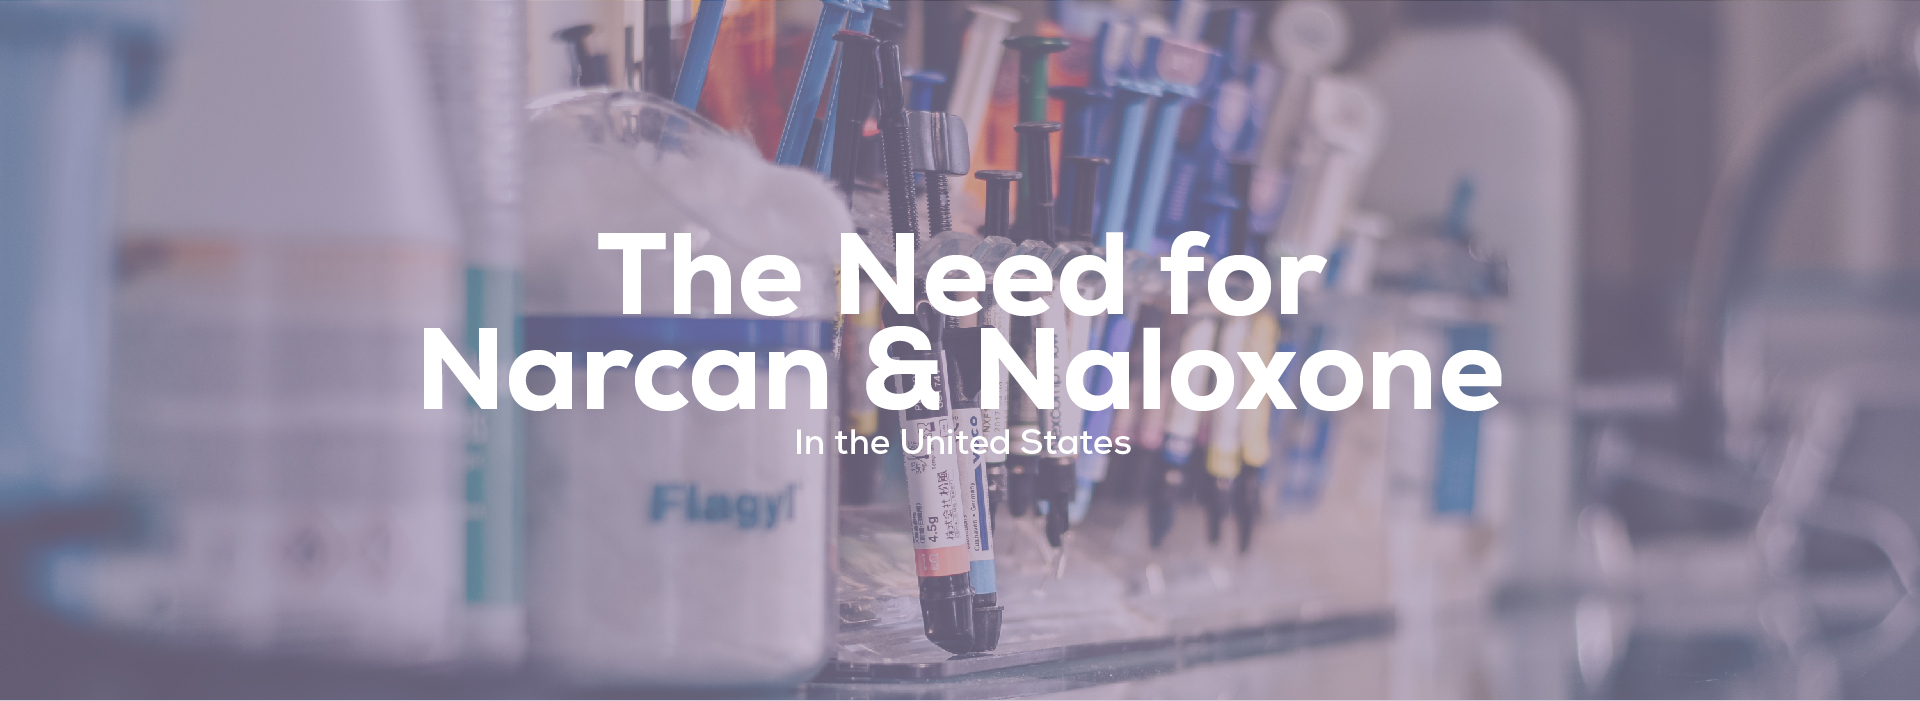 Narcan and Naloxone Use in the U.S.